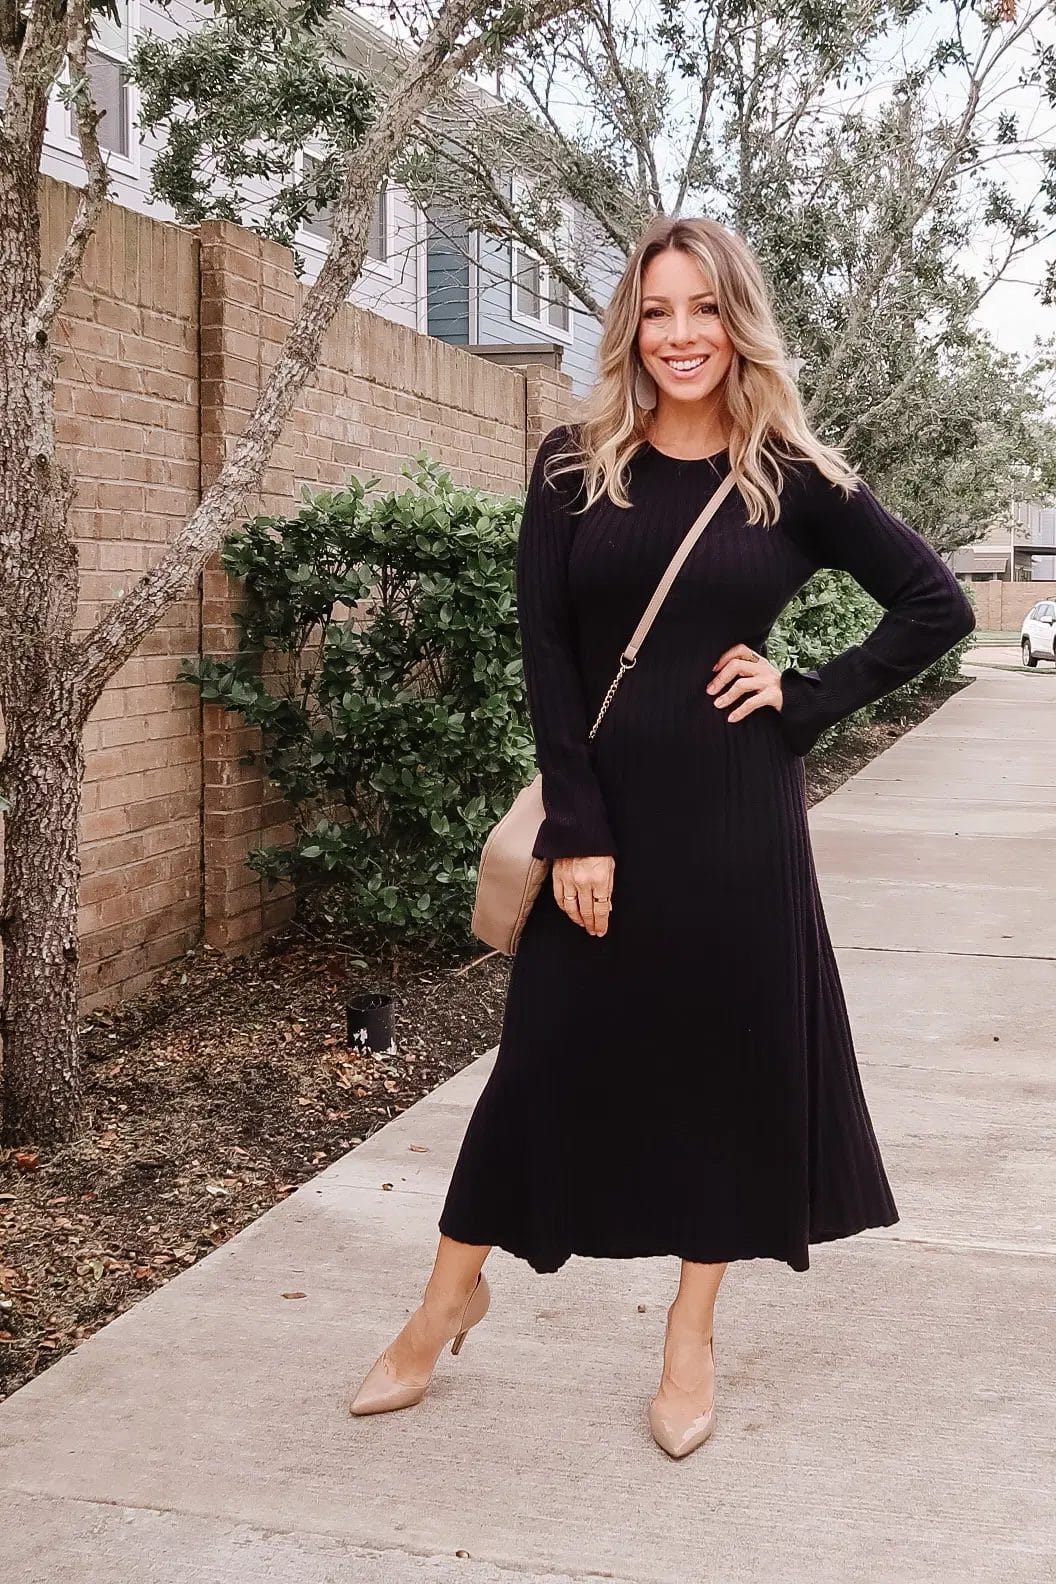 Workout Outfit - One Small Blonde  Dallas fashion blogger, Girls night,  Lounge wear